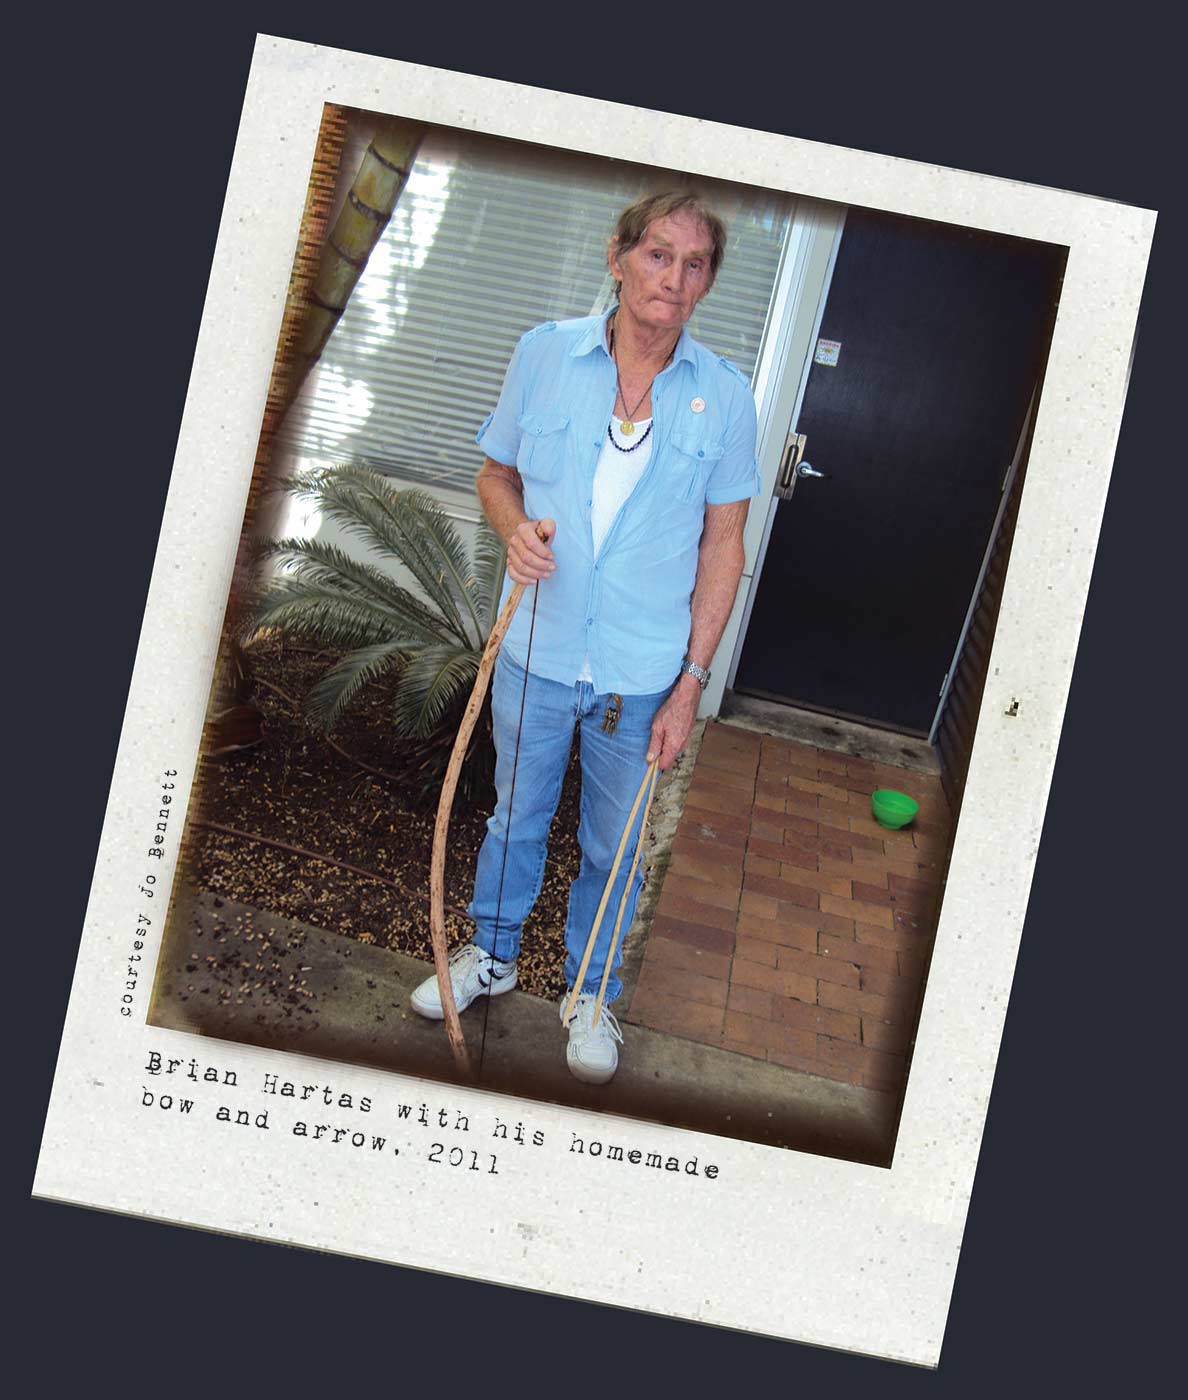 Polaroid photograph showing a man standing and holding a wooden bow in his left hand and two arrows in his right. Typewritten text below reads 'Bryan Hartas with his homemade bow and arrow, 2011'. 'Courtesy Jo Bennett' is written along the left side. - click to view larger image